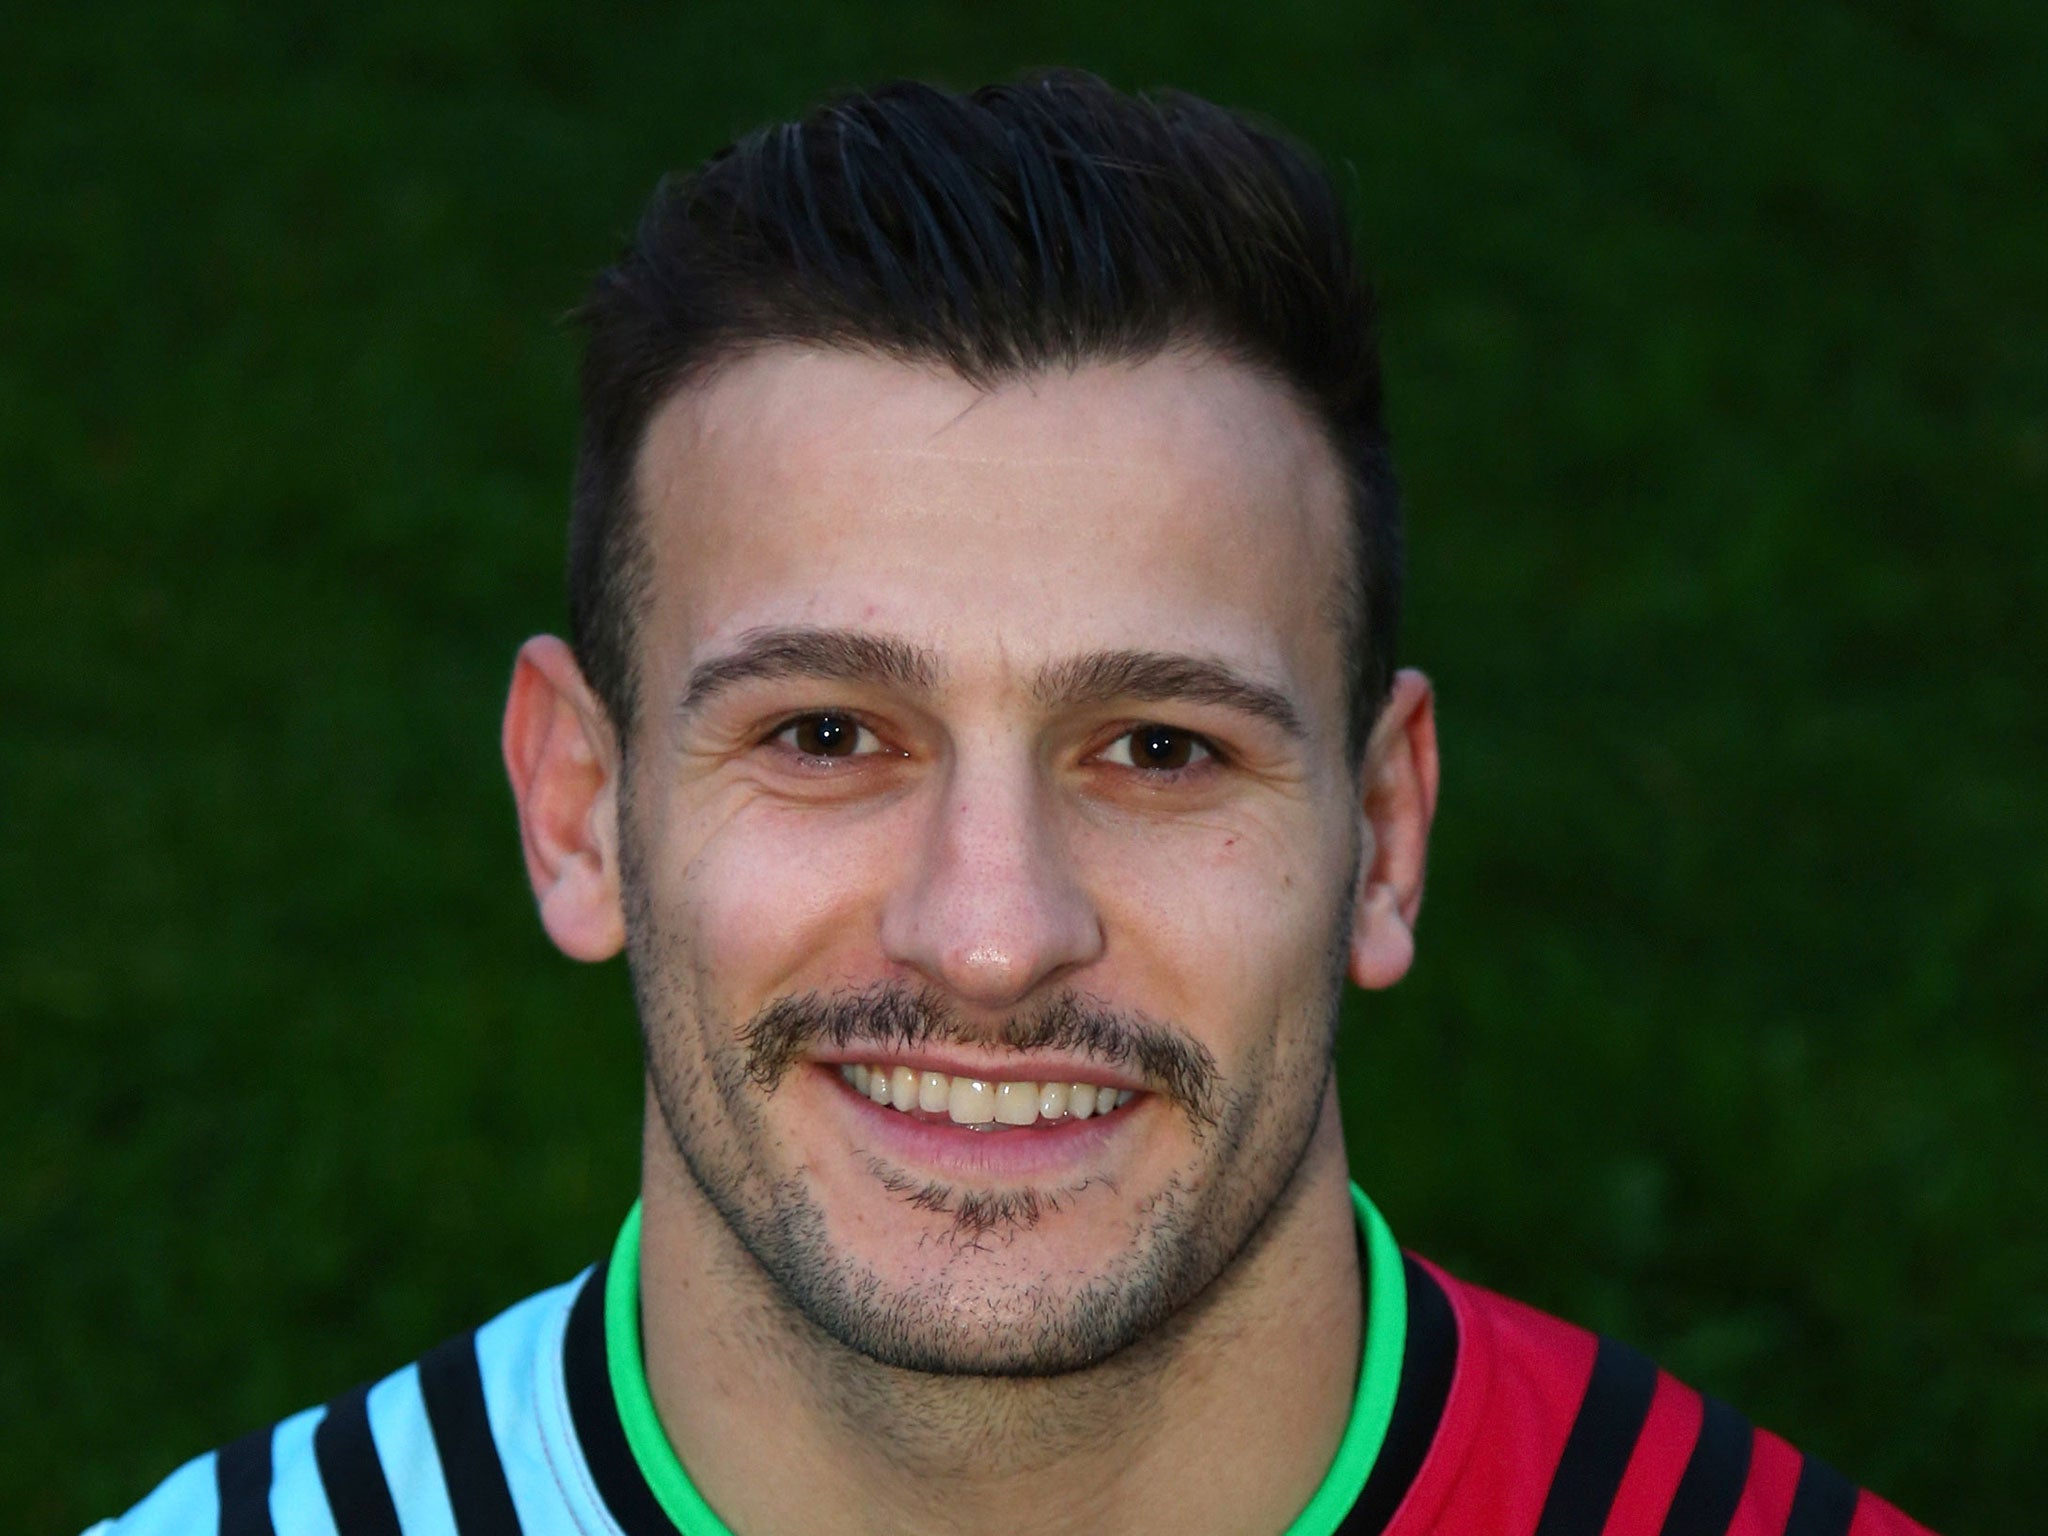 England rugby player, Danny Care, is giving up fizzy drinks